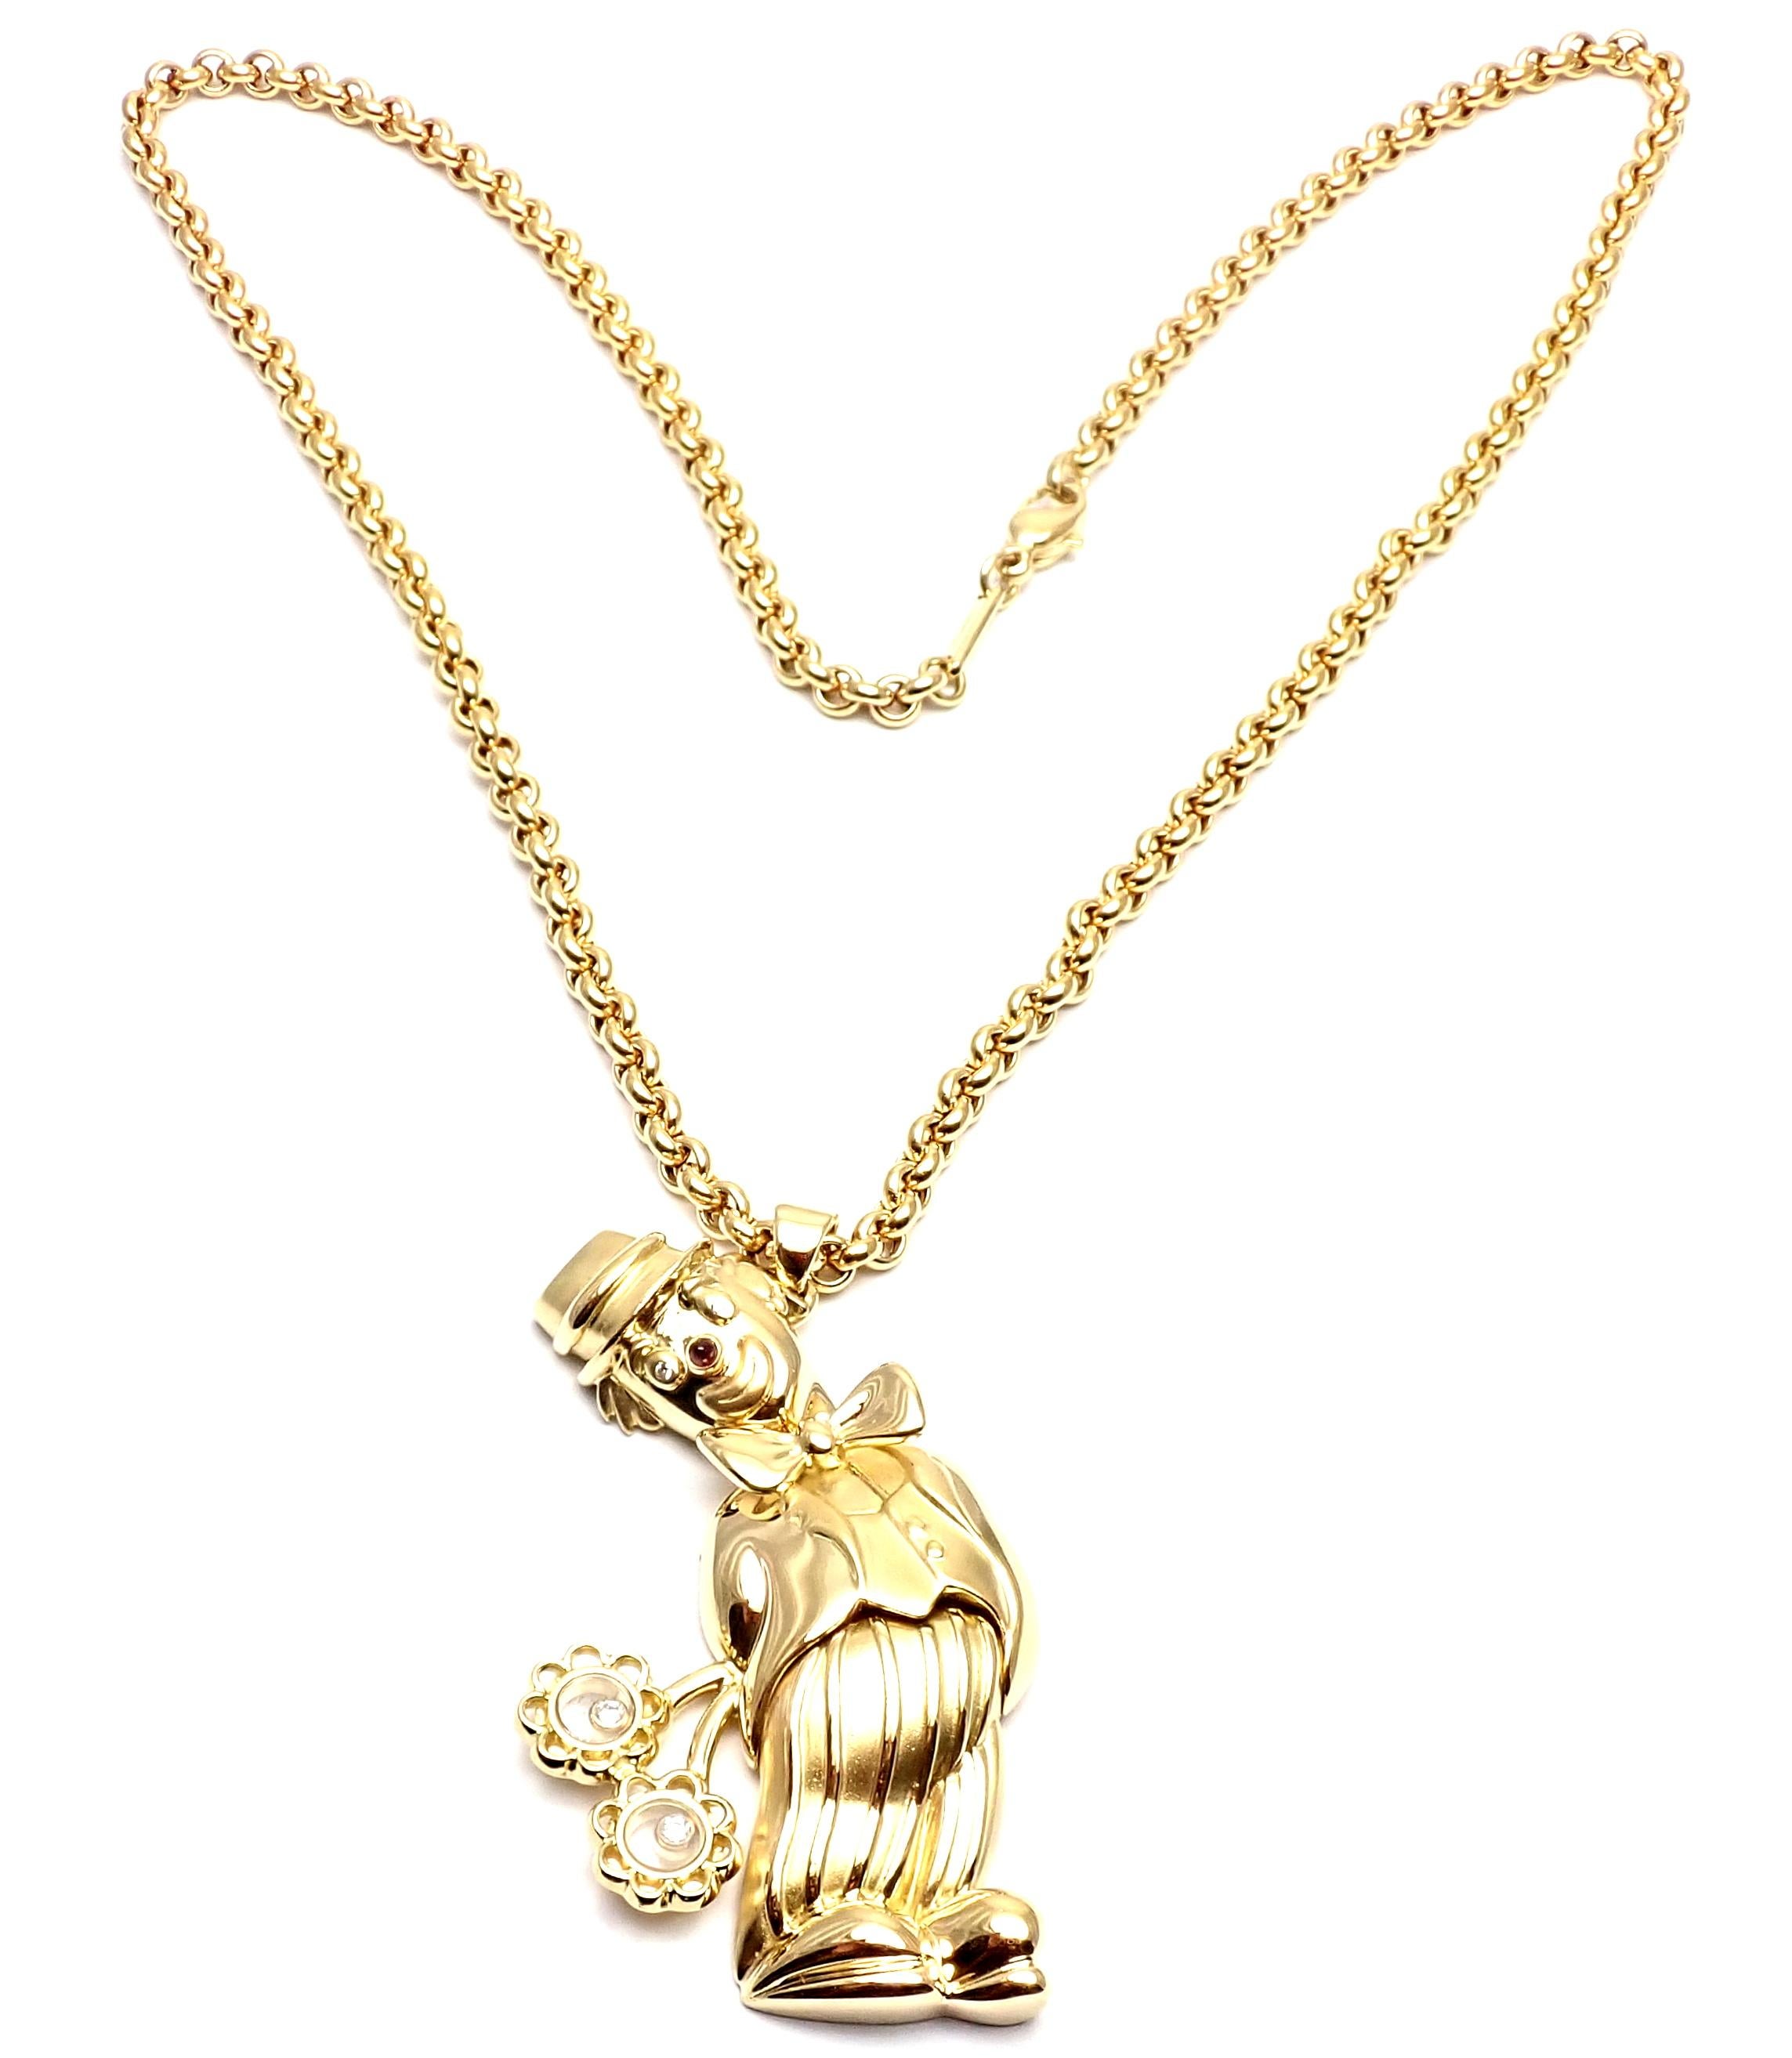 18k Yellow Gold Diamond Large Happy Clown With Flowers Pendant Necklace by Chopard. 
With 4 round brilliant cut diamonds = VVS1 clarity, E color total weight .10ct
1 round ruby
Details: 
Length: 20